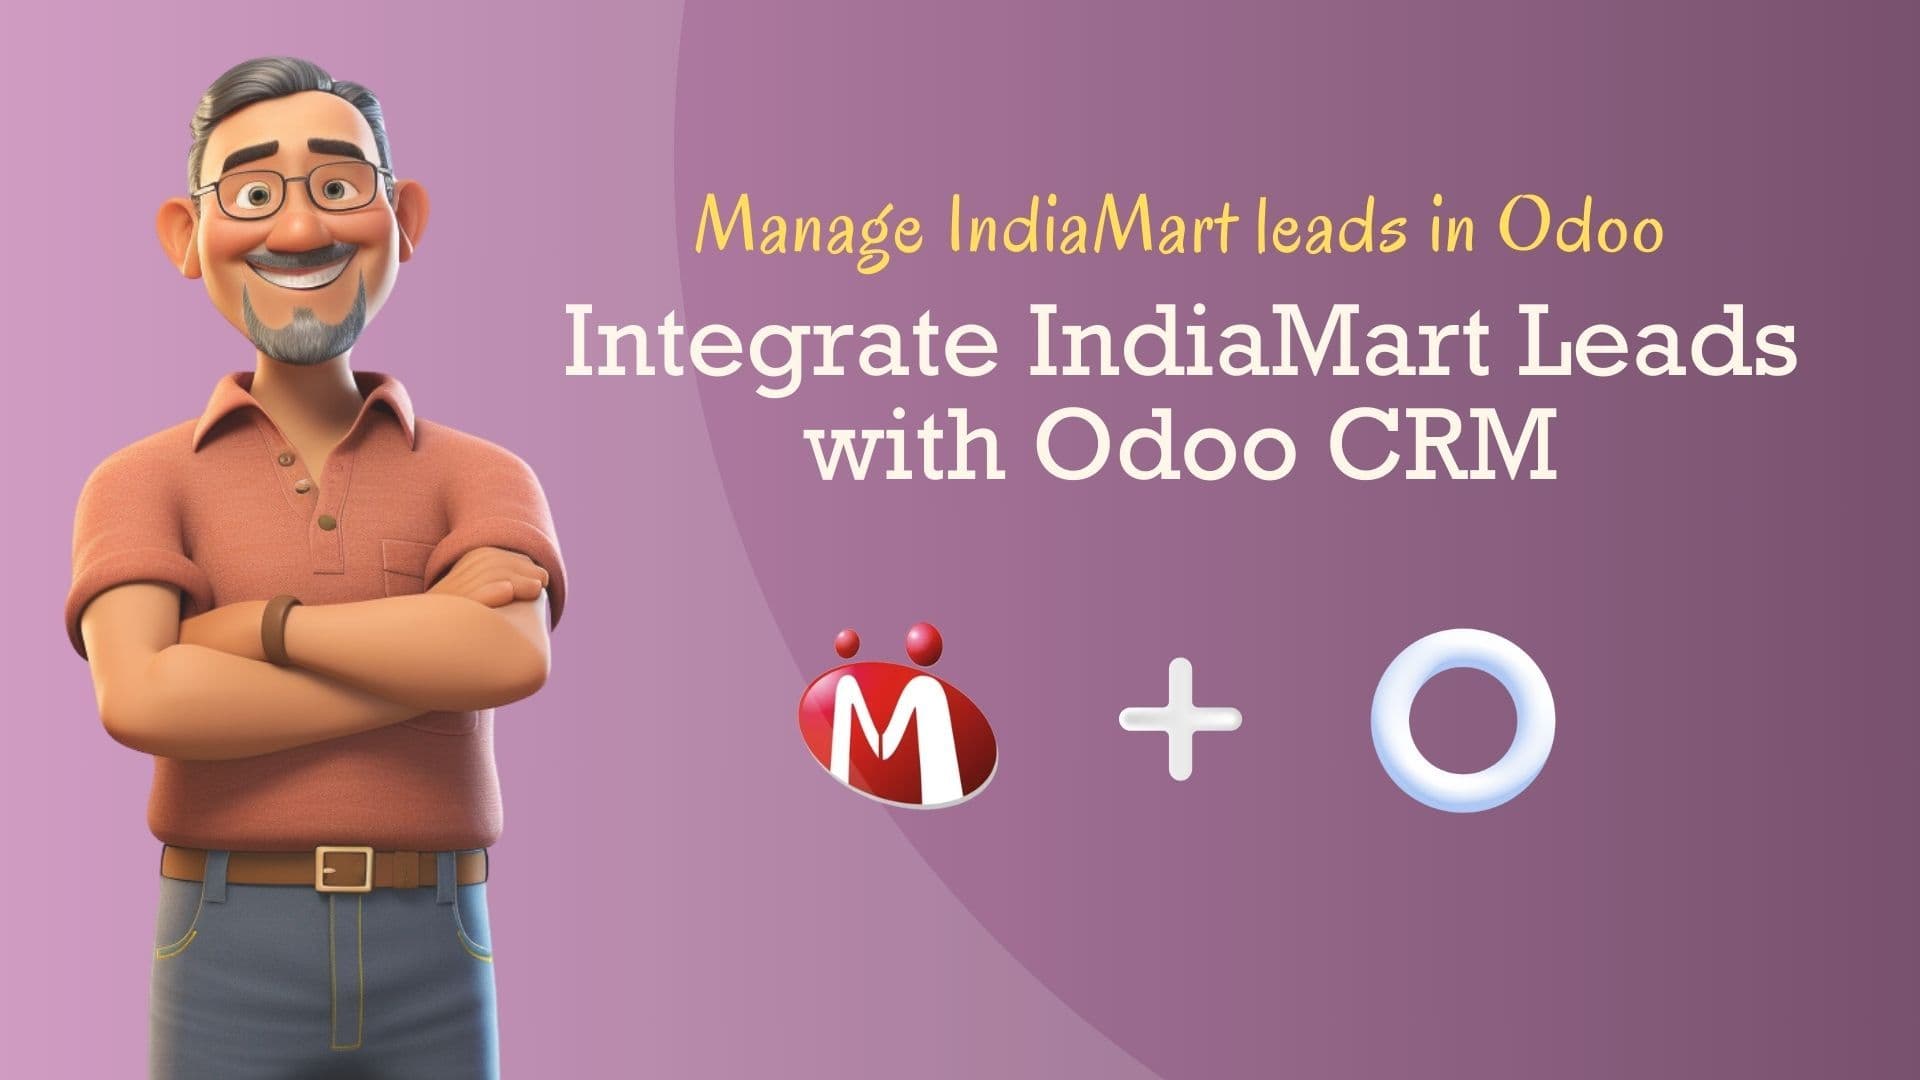 Integrate IndiaMart Leads with Odoo CRM